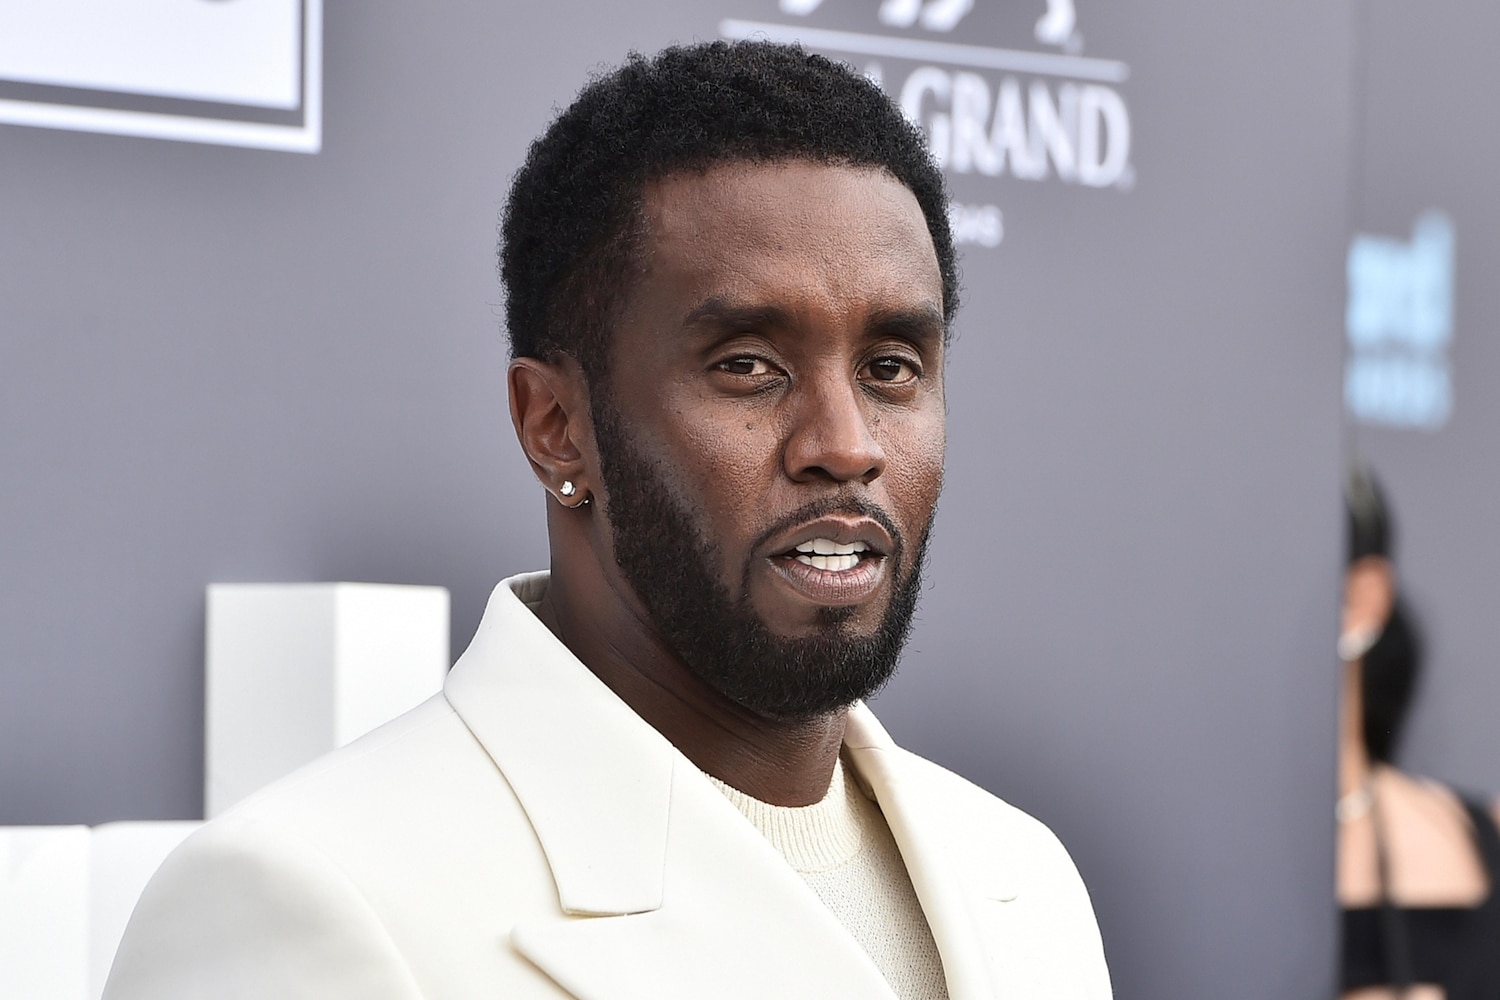 Music mogul and entrepreneur Sean "Diddy" Combs arrives at the Billboard Music Awards, May 15, 2022, in Las Vegas. Jordan Strauss/Invision/AP, FILE